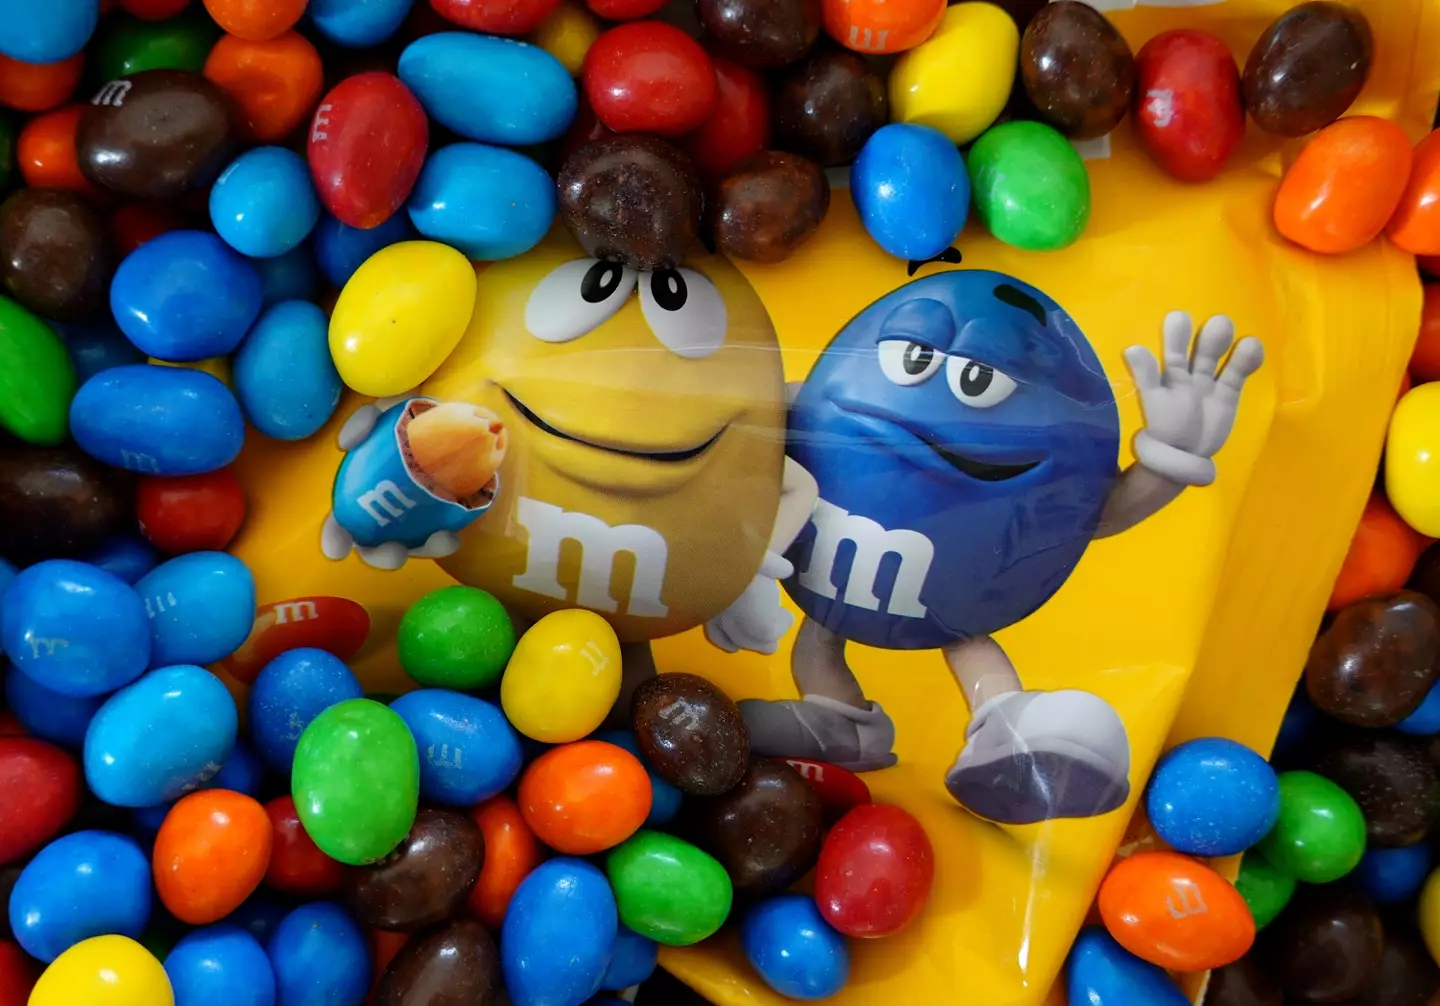 Have you ever wondered what M&M stands for?